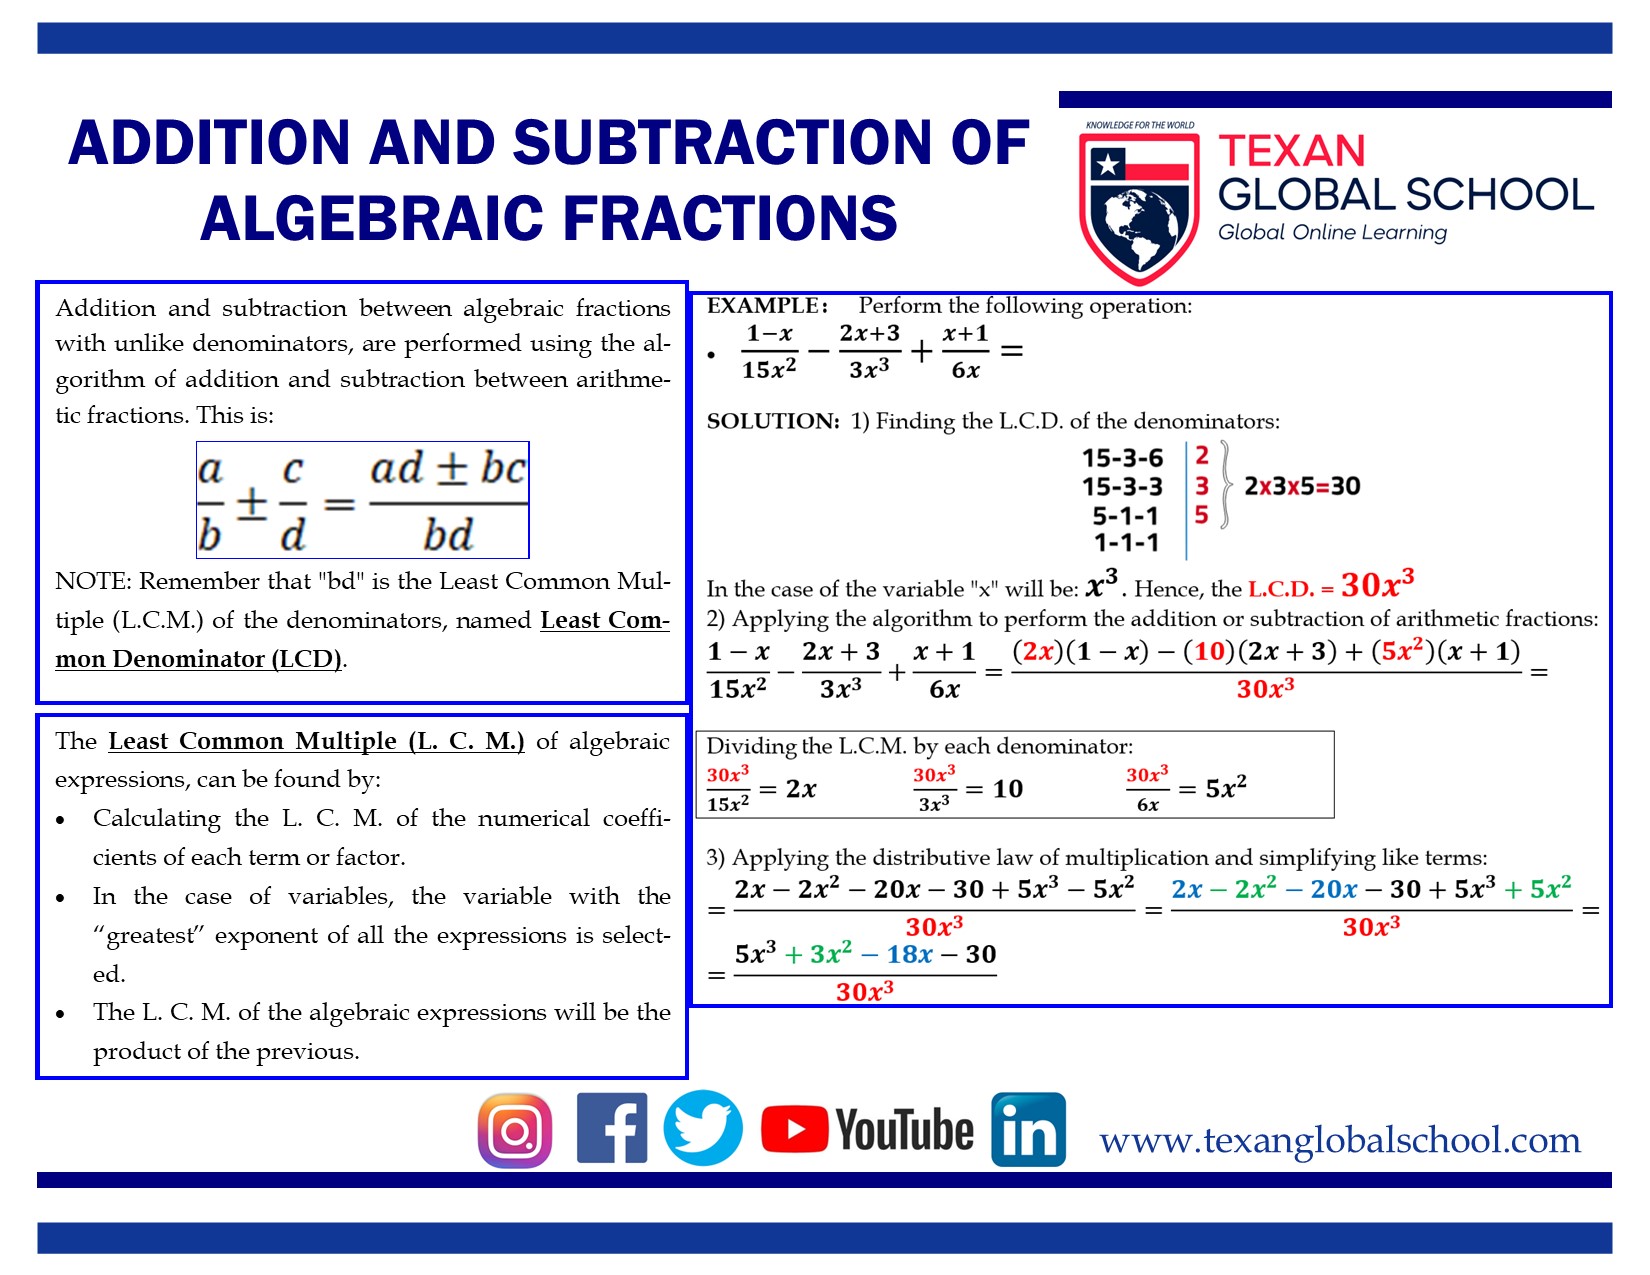 Addition and Subtraction of Algebraic Fractions 2